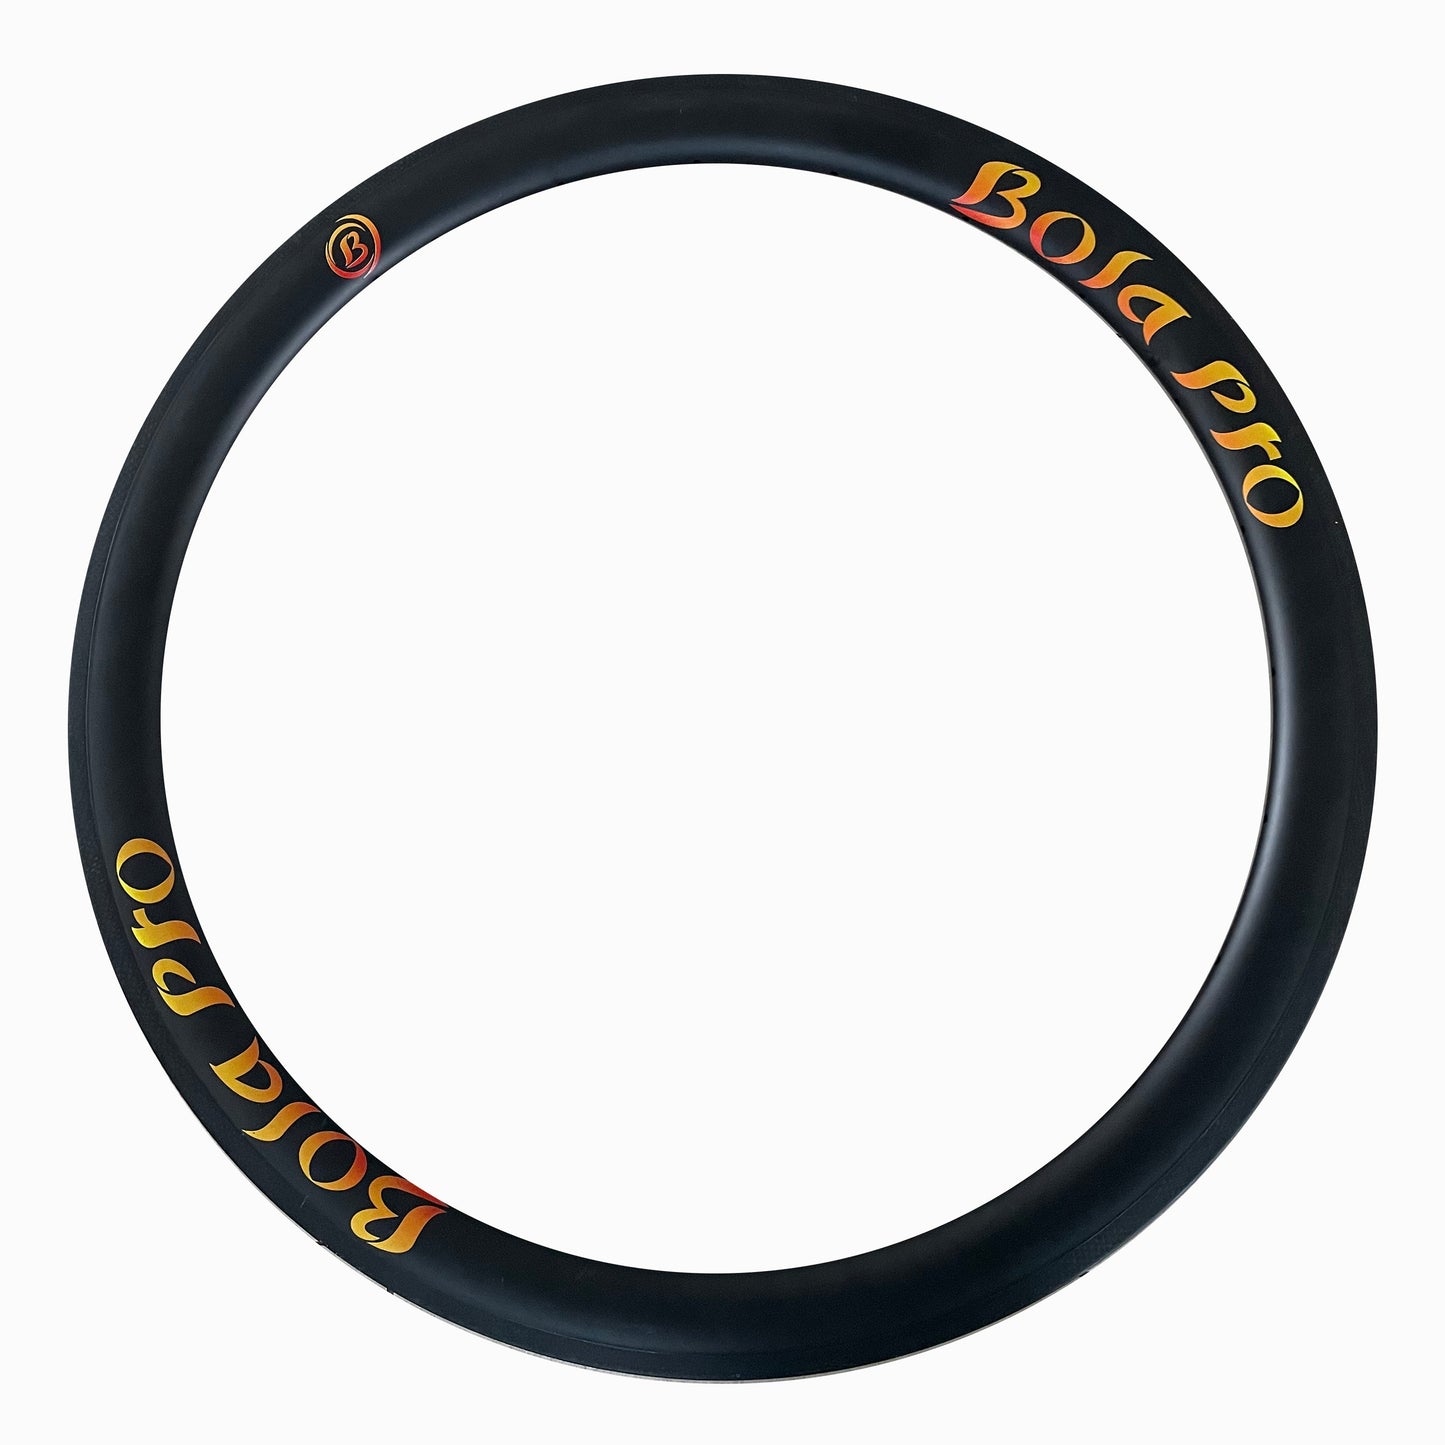 700c Asymmetric route tubeless ready carbon bike racing rim 30mm low profile  28mm outer wide 21mm inner wide